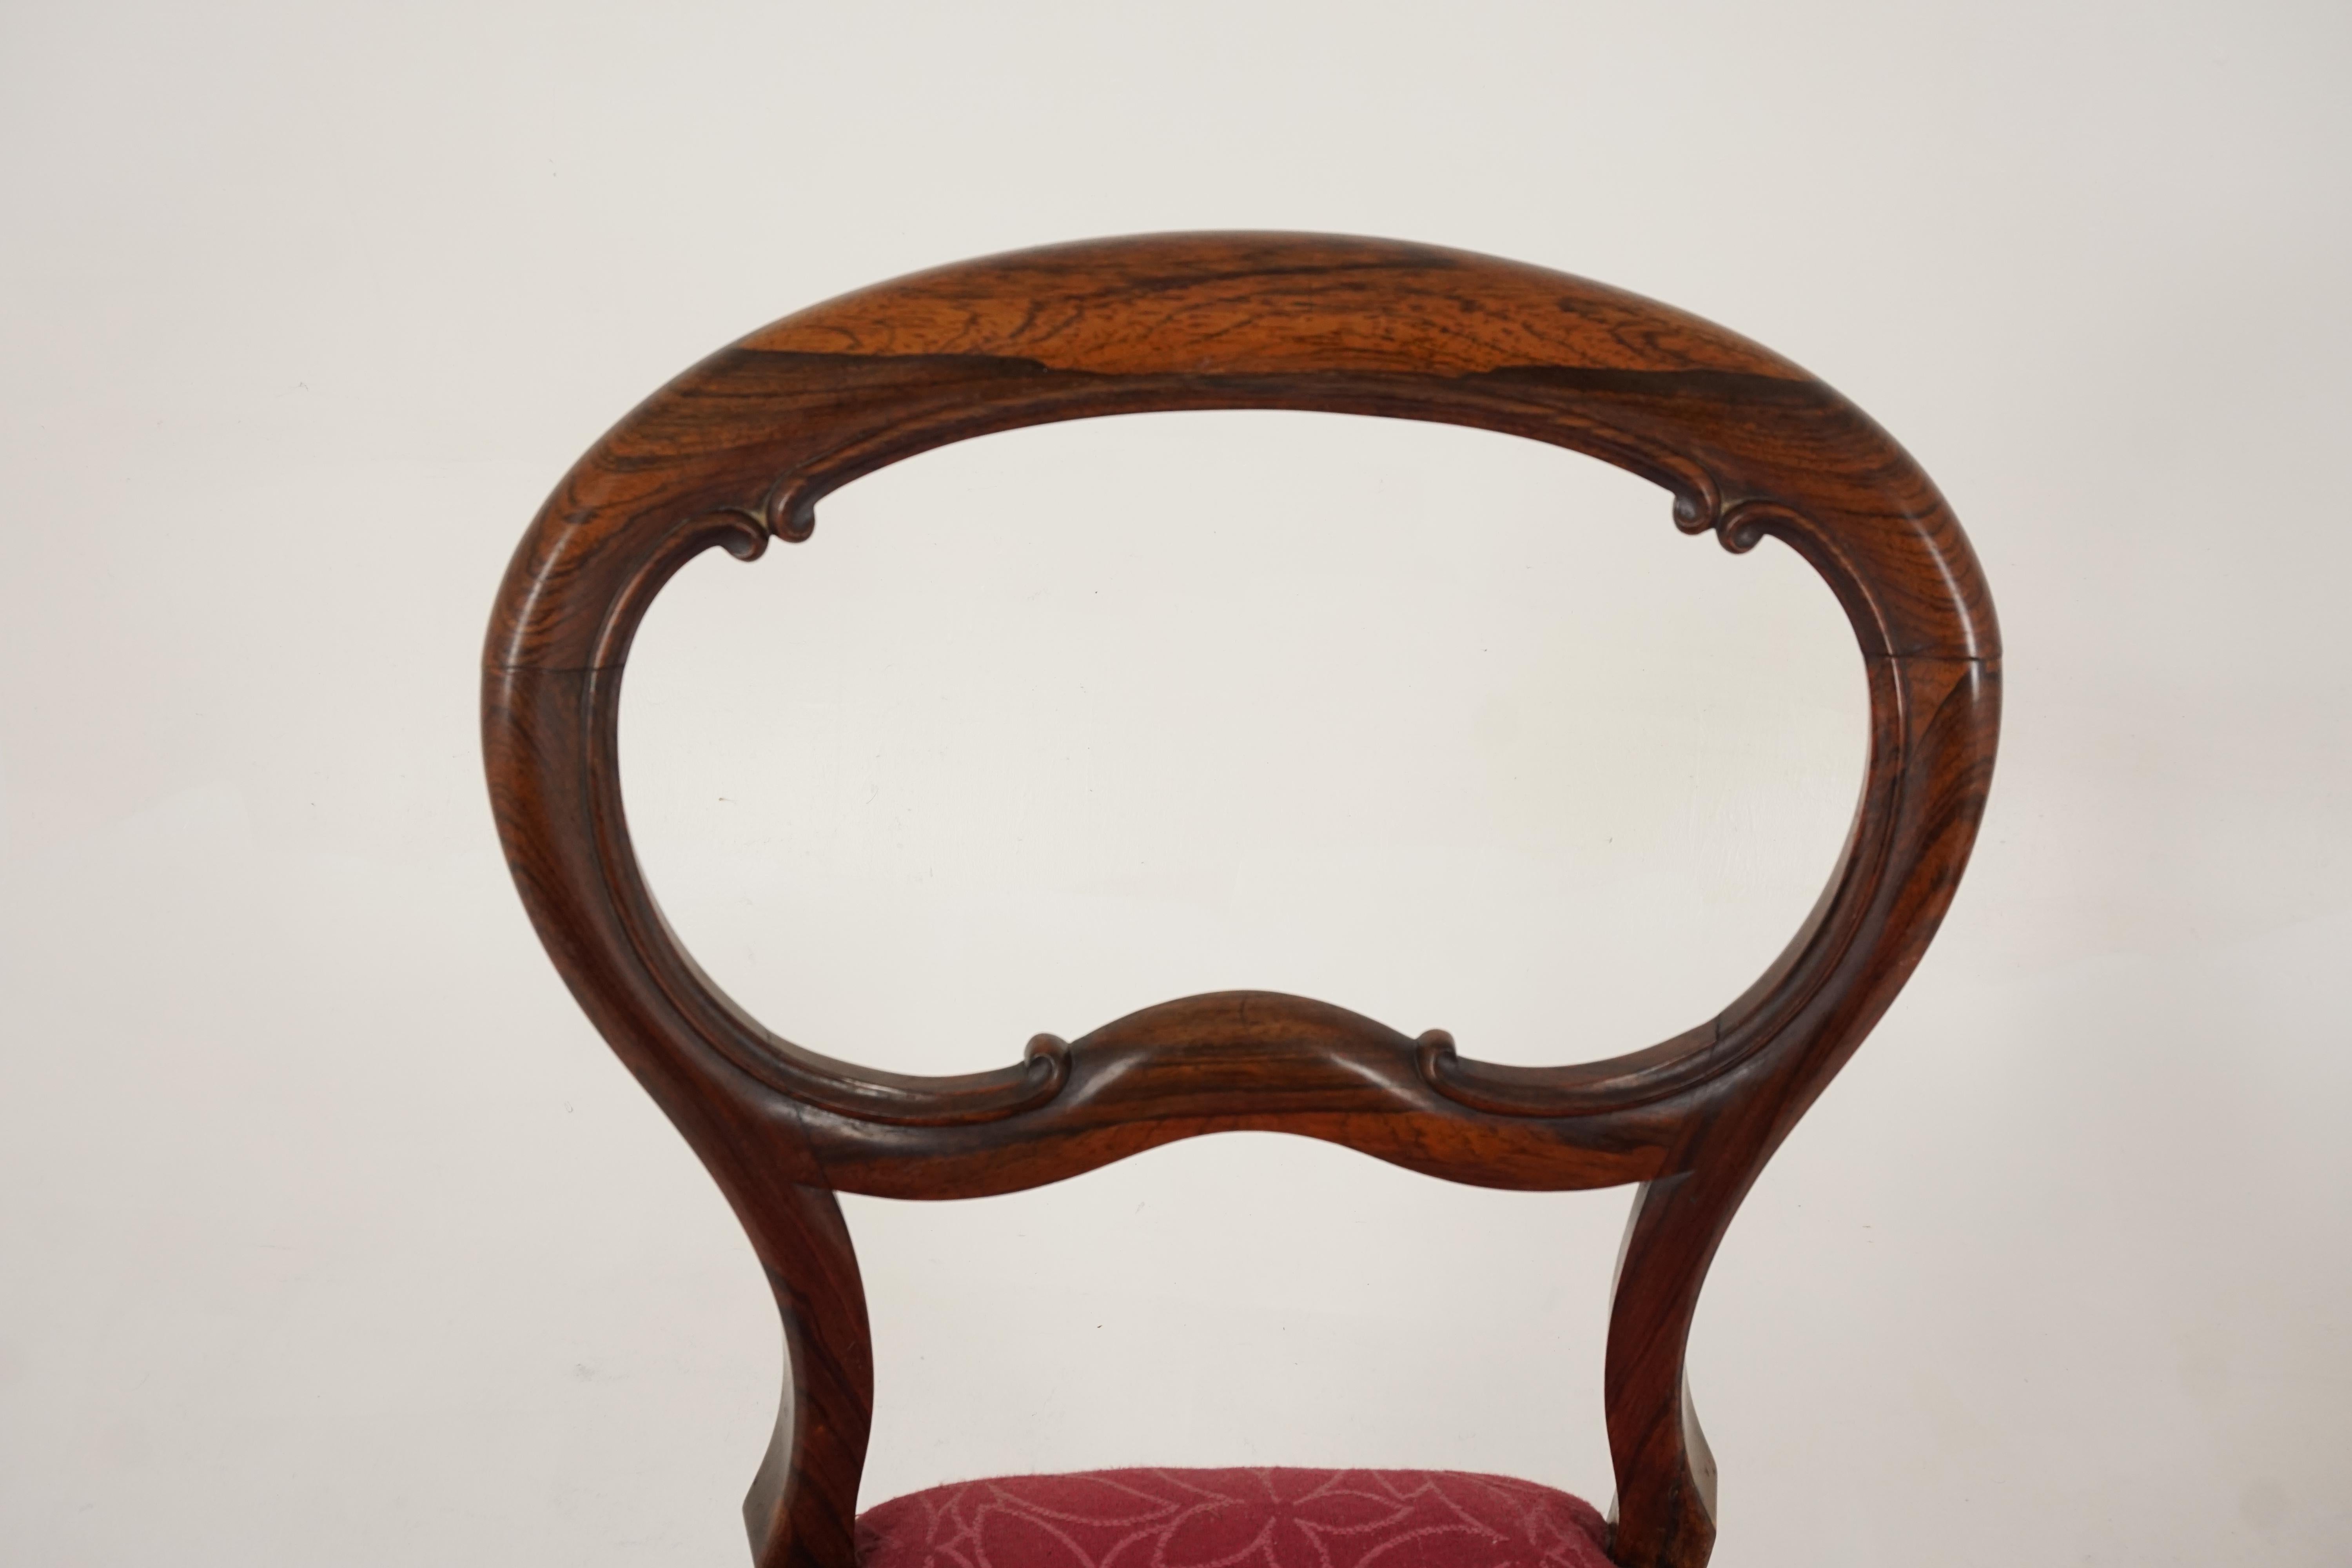 4 antique Victorian rosewood balloon back dining chairs, Scotland 1870, B2161

Scotland, 1870
Solid rosewood
Original finish
Ribbed open back design
With shaped central horizontal splat
Stuff-over seats upholstered in a patterned